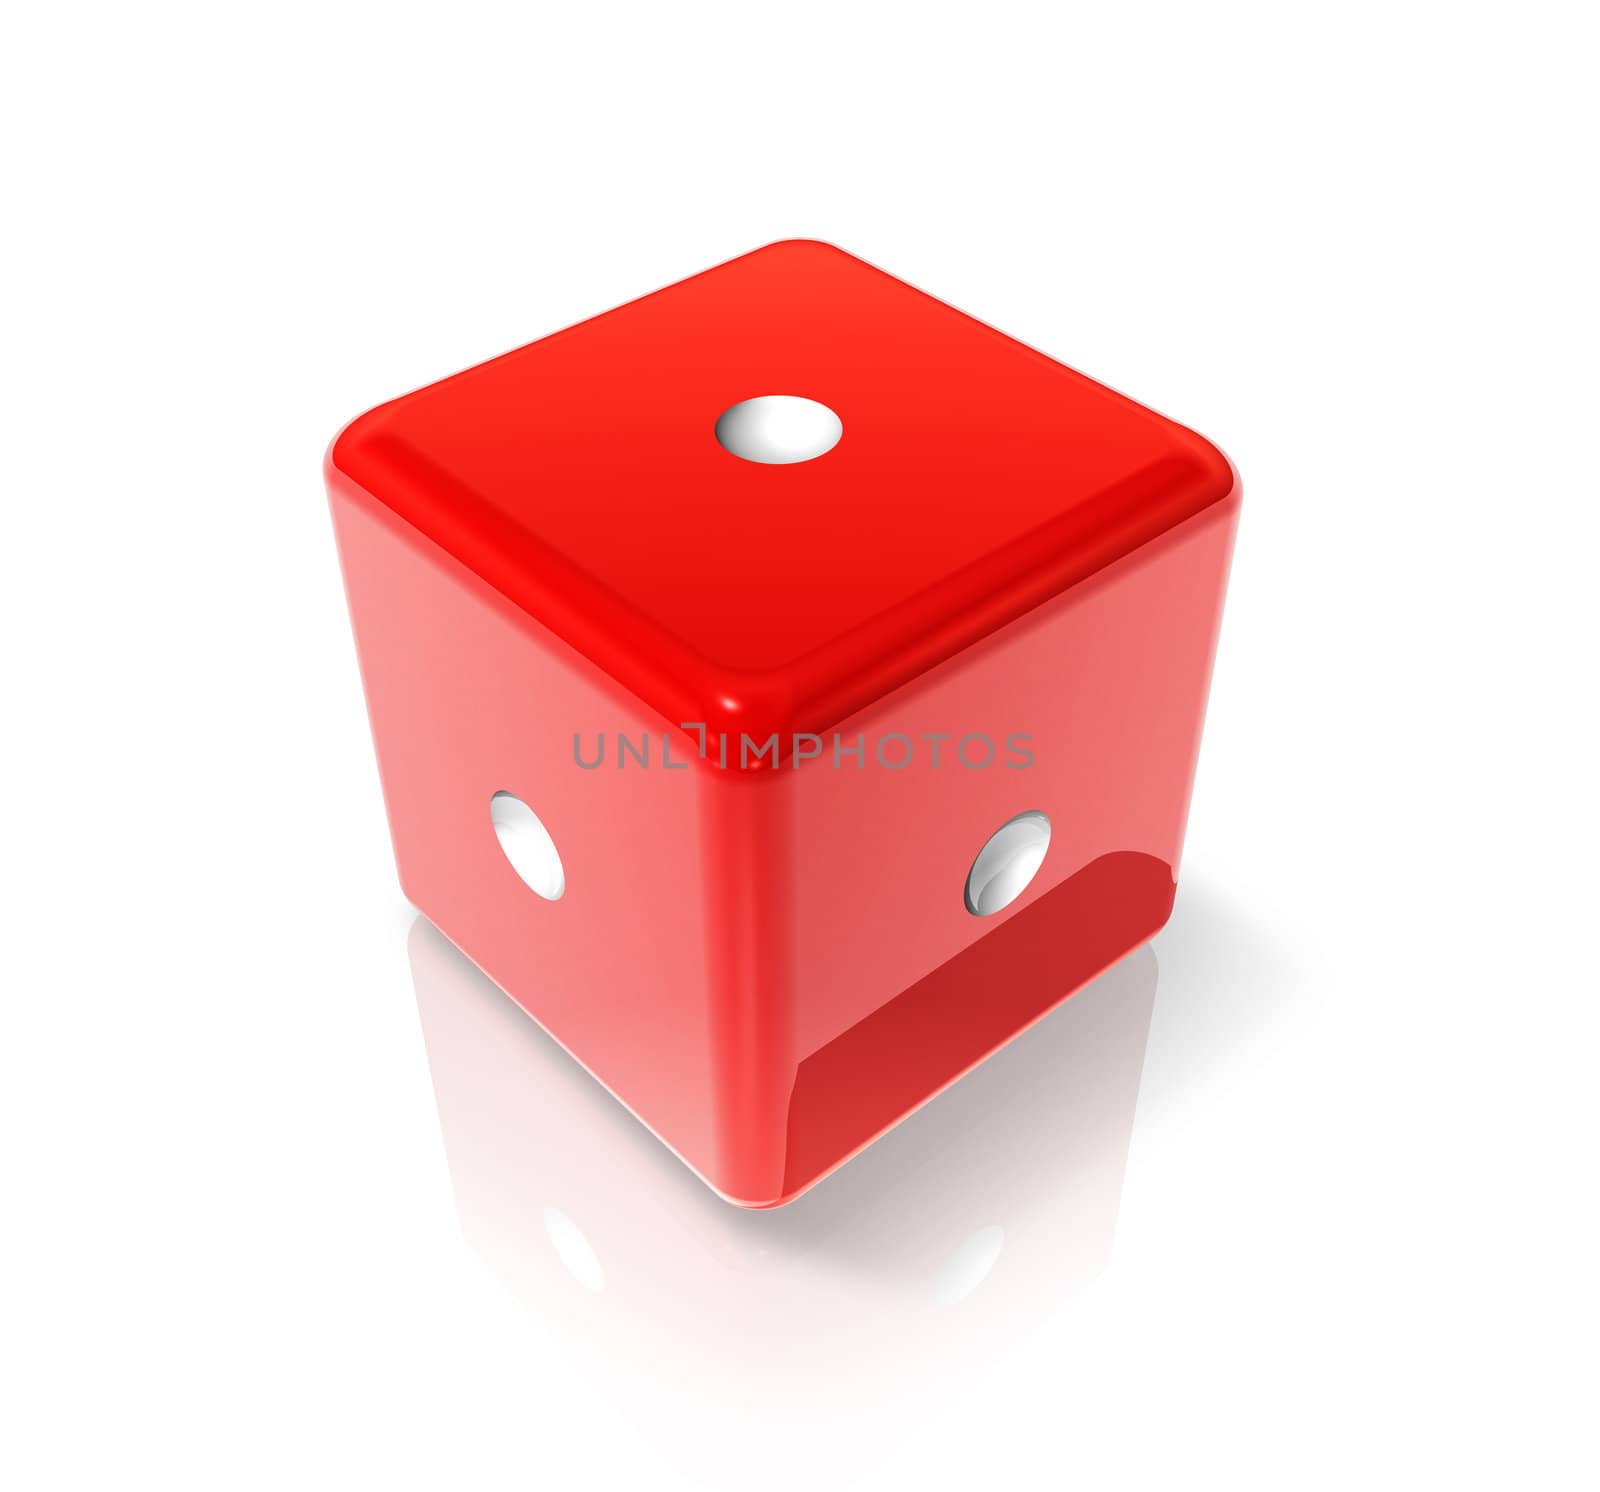 One red dice by daboost